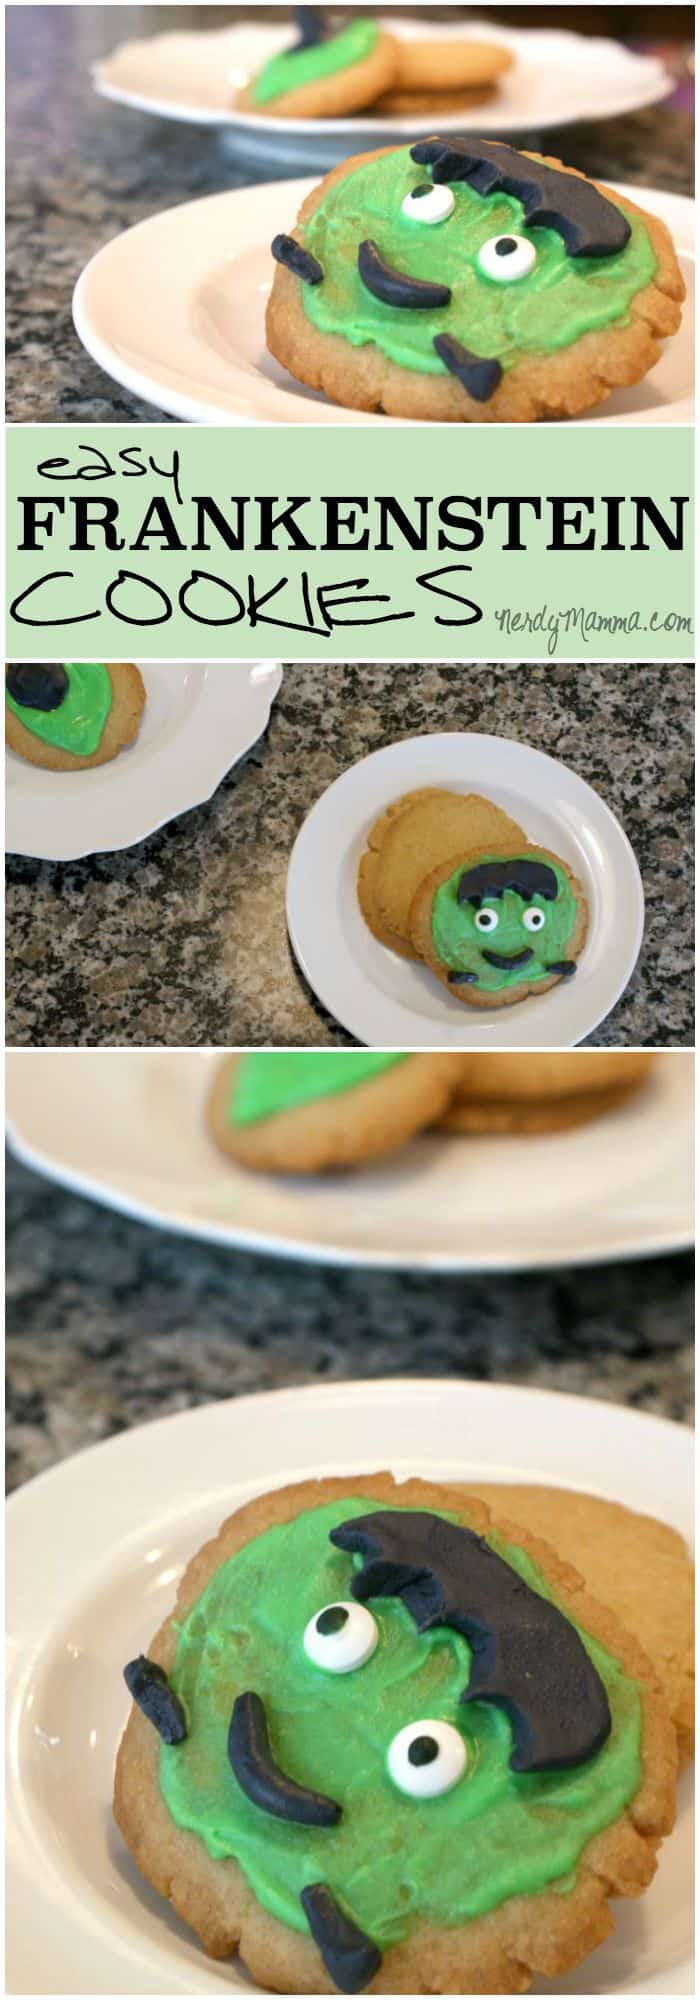 My whole family had fun decorating these silly frankenstein cookies for halloween.